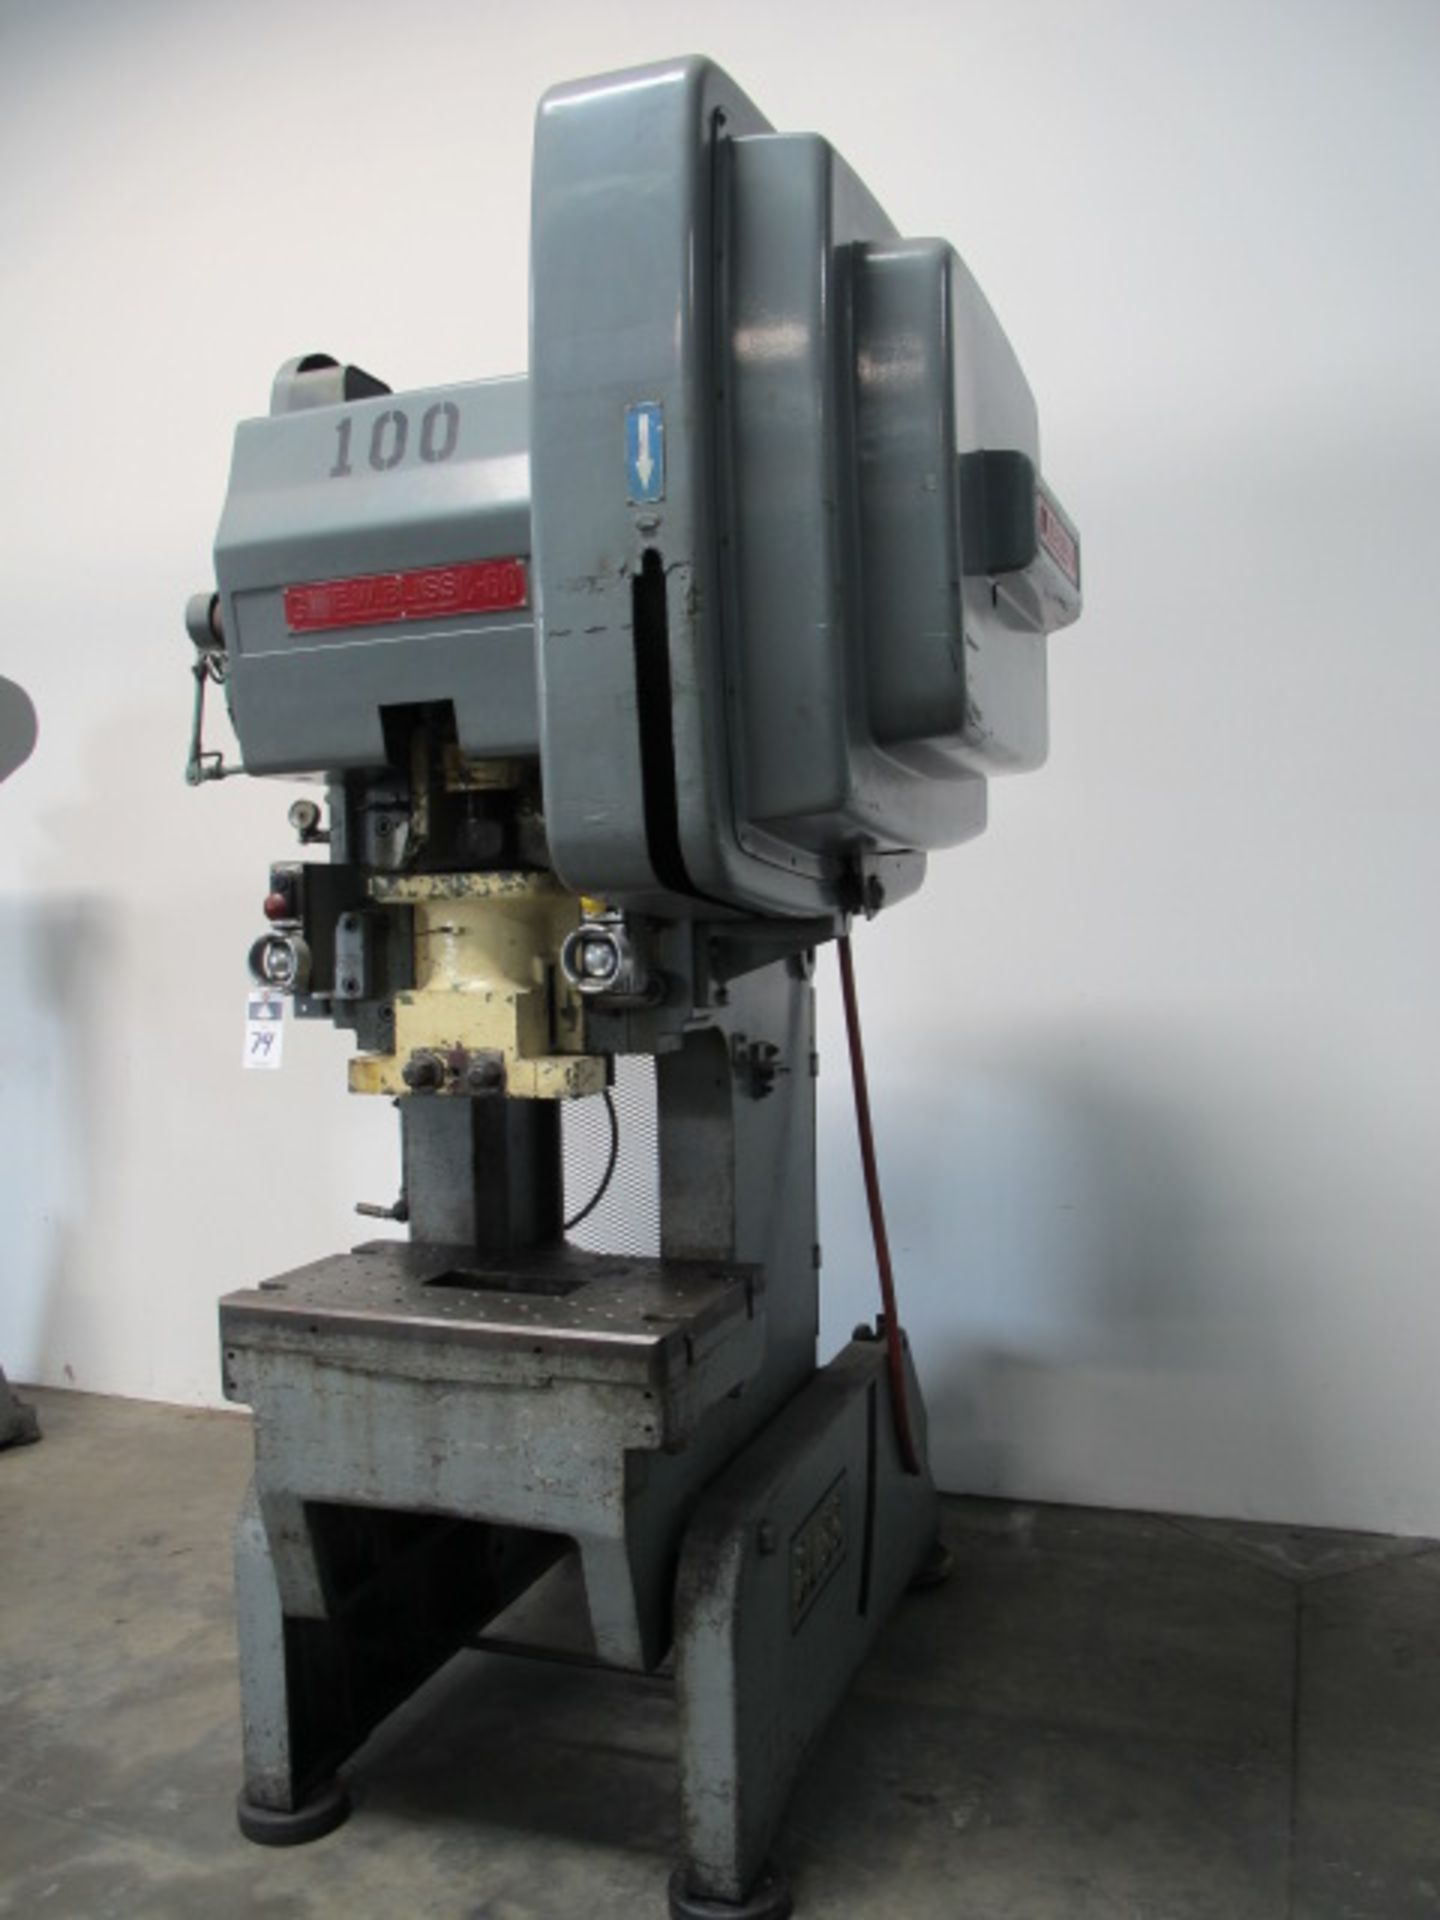 Bliss C-60 60-Ton OBI Stamping Press s/n H65677 w/ Pneumatic Clutch, 21” x 32” Bolster Area, 11” x - Image 2 of 7